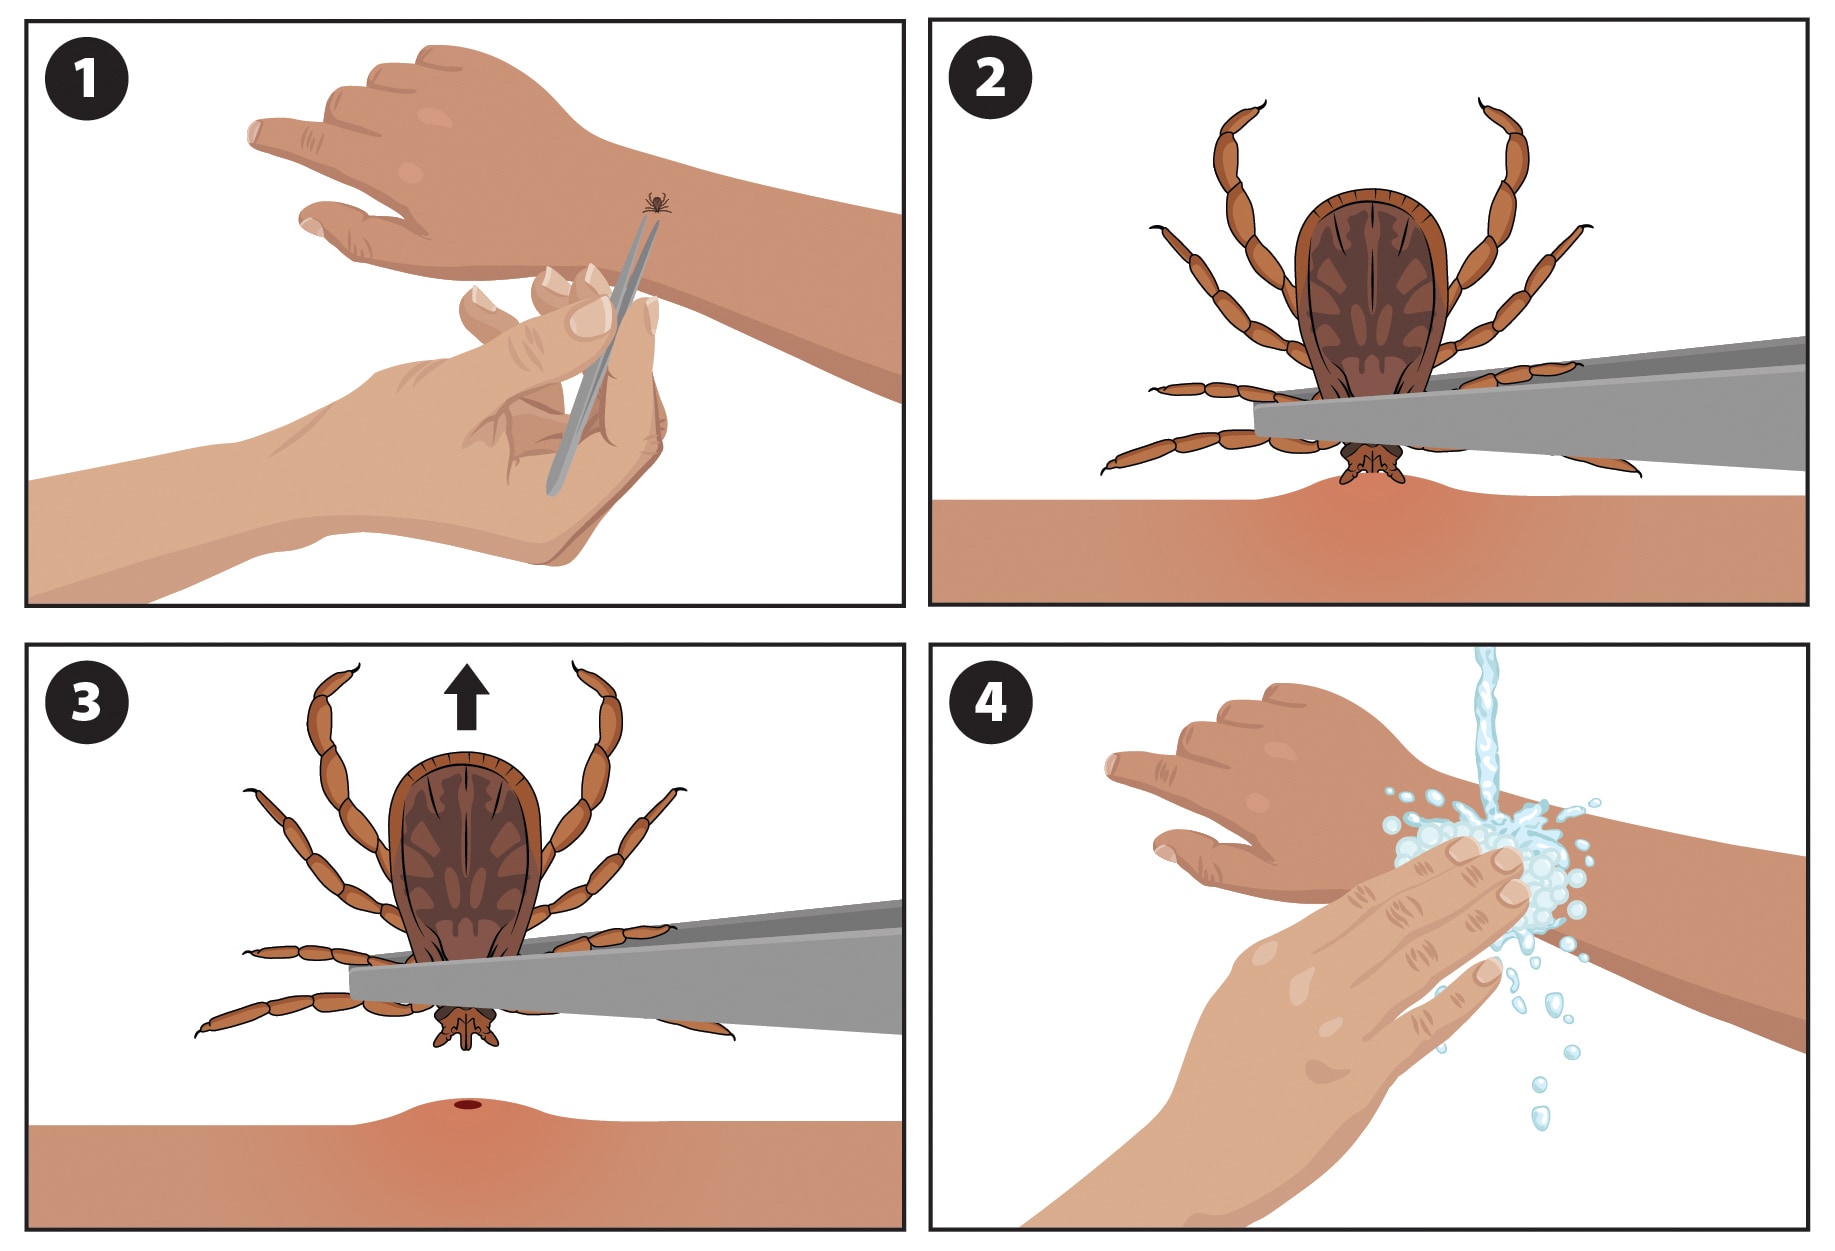 Illustration showing how to remove a tick (Dermacentor variabilis pictured).